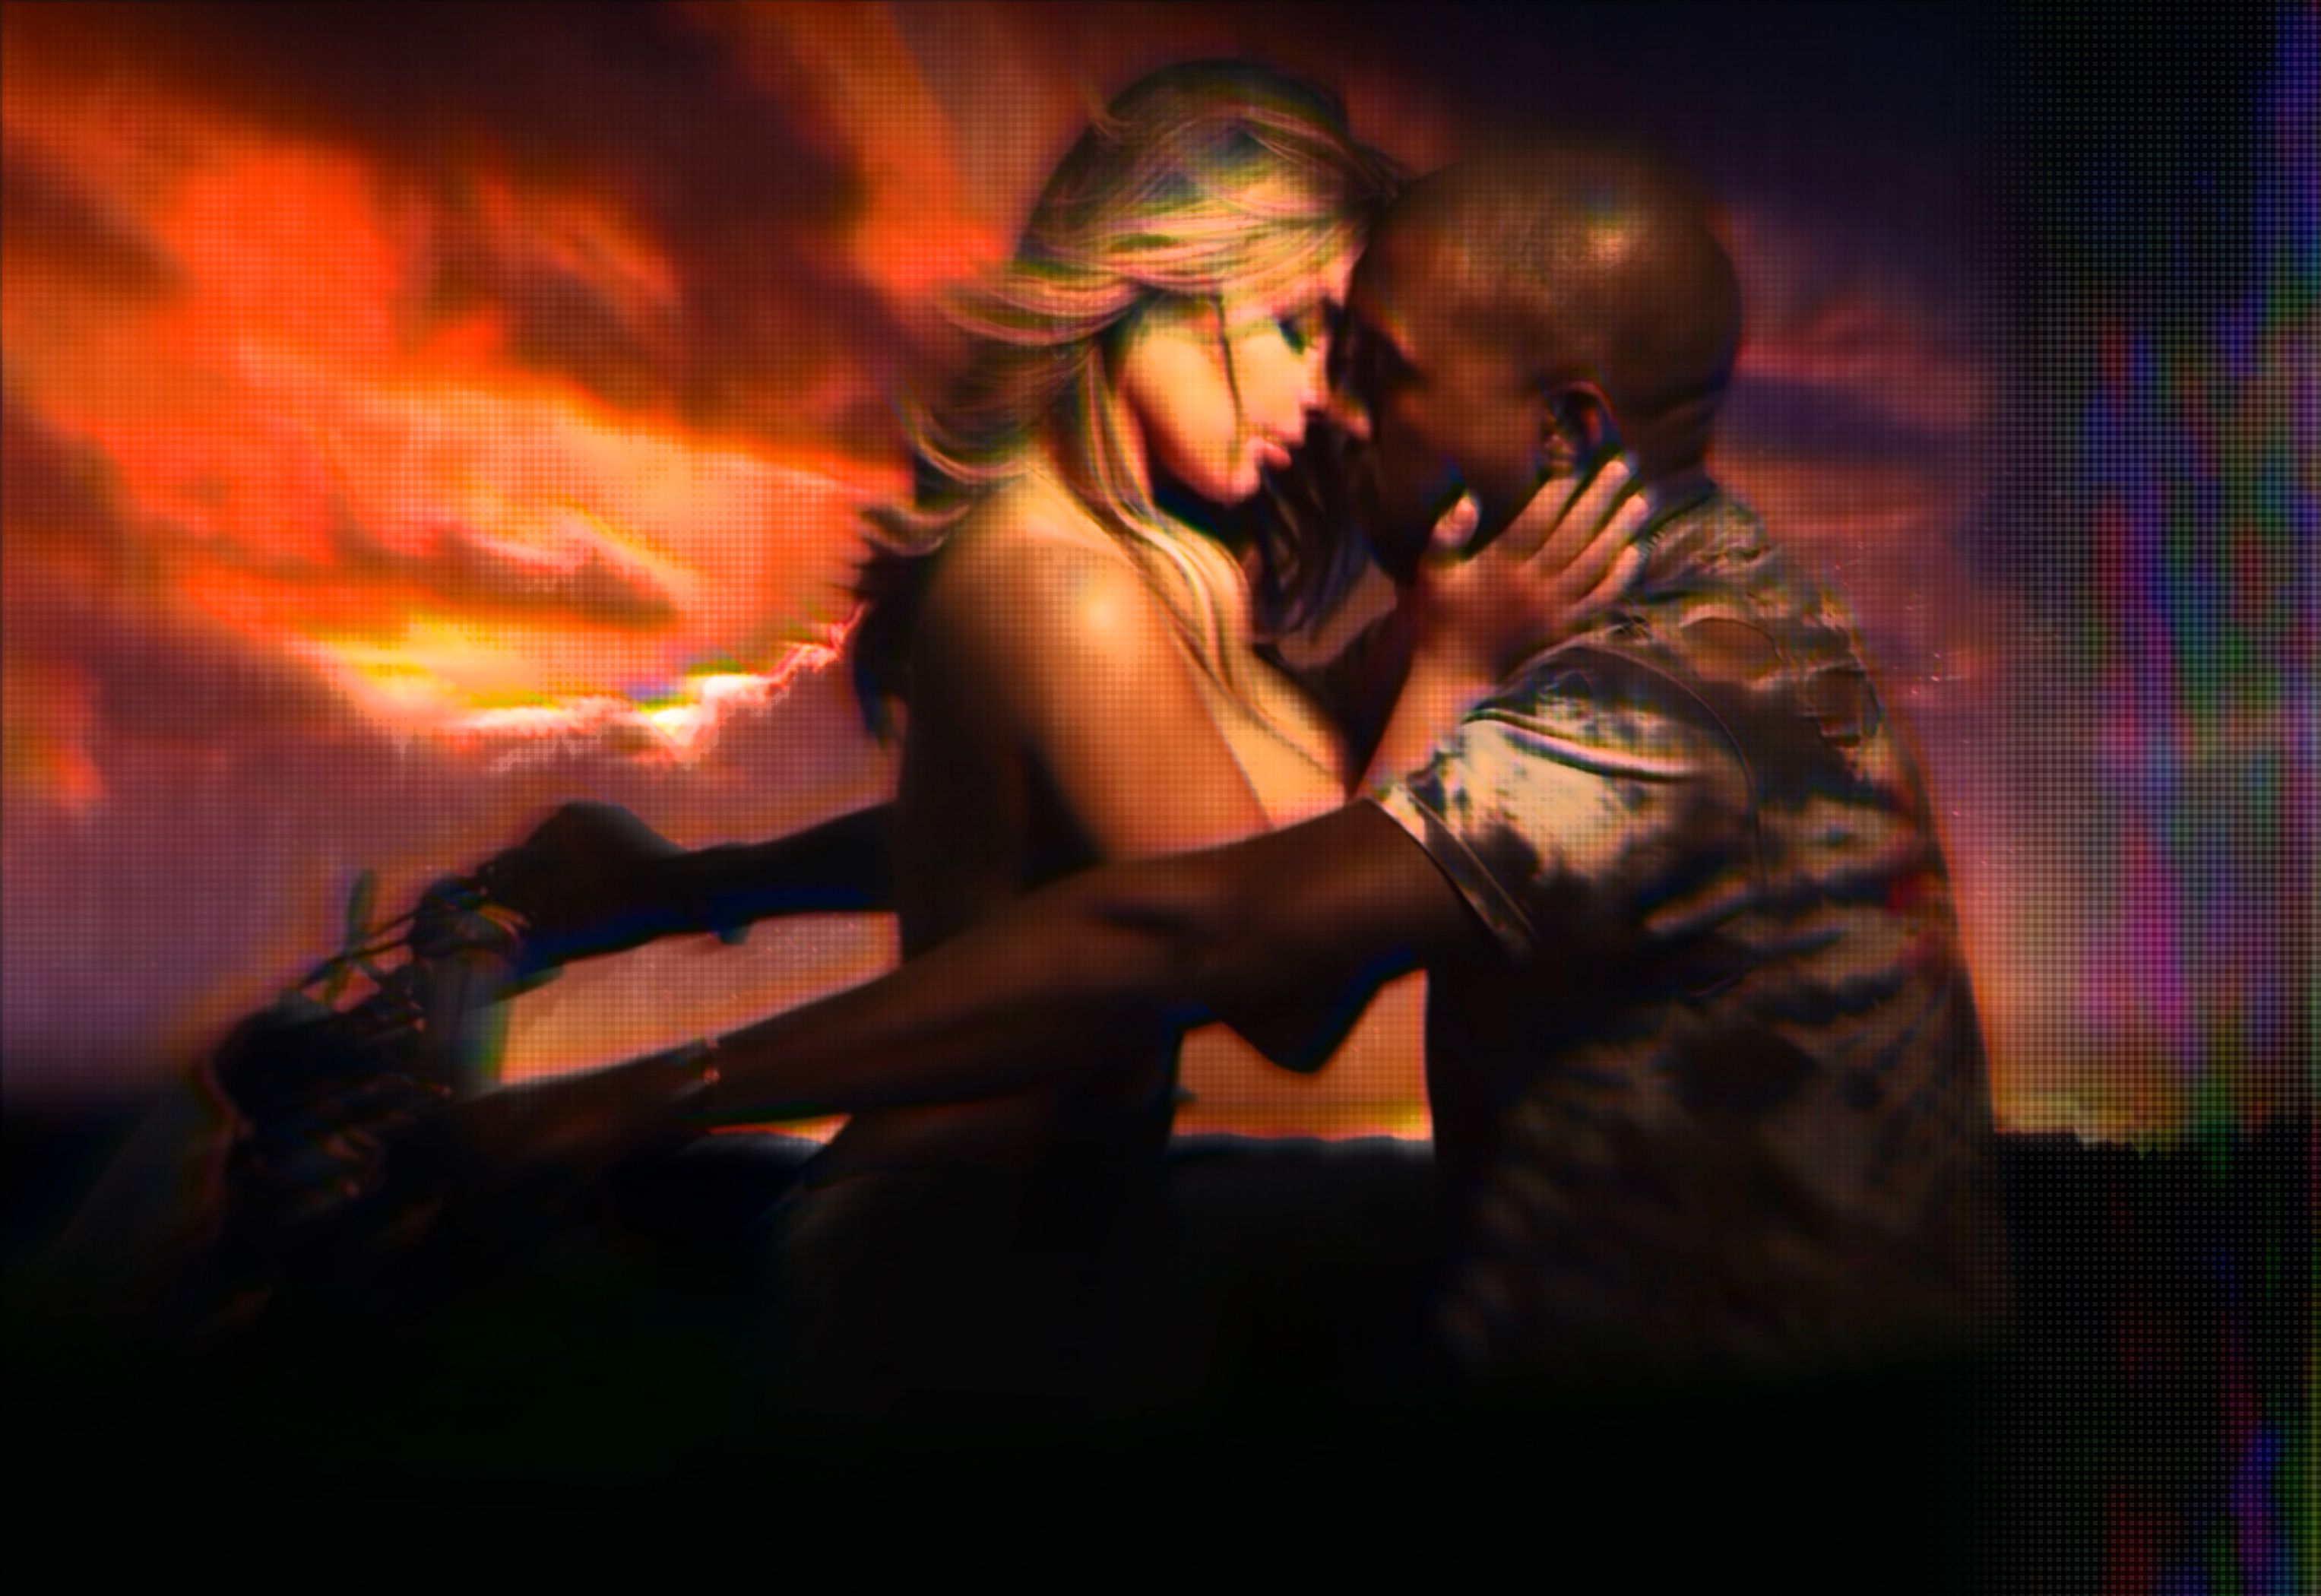 Rap Sex Boobs - The End of Kim Kardashian and Kanye West's Wild Ride